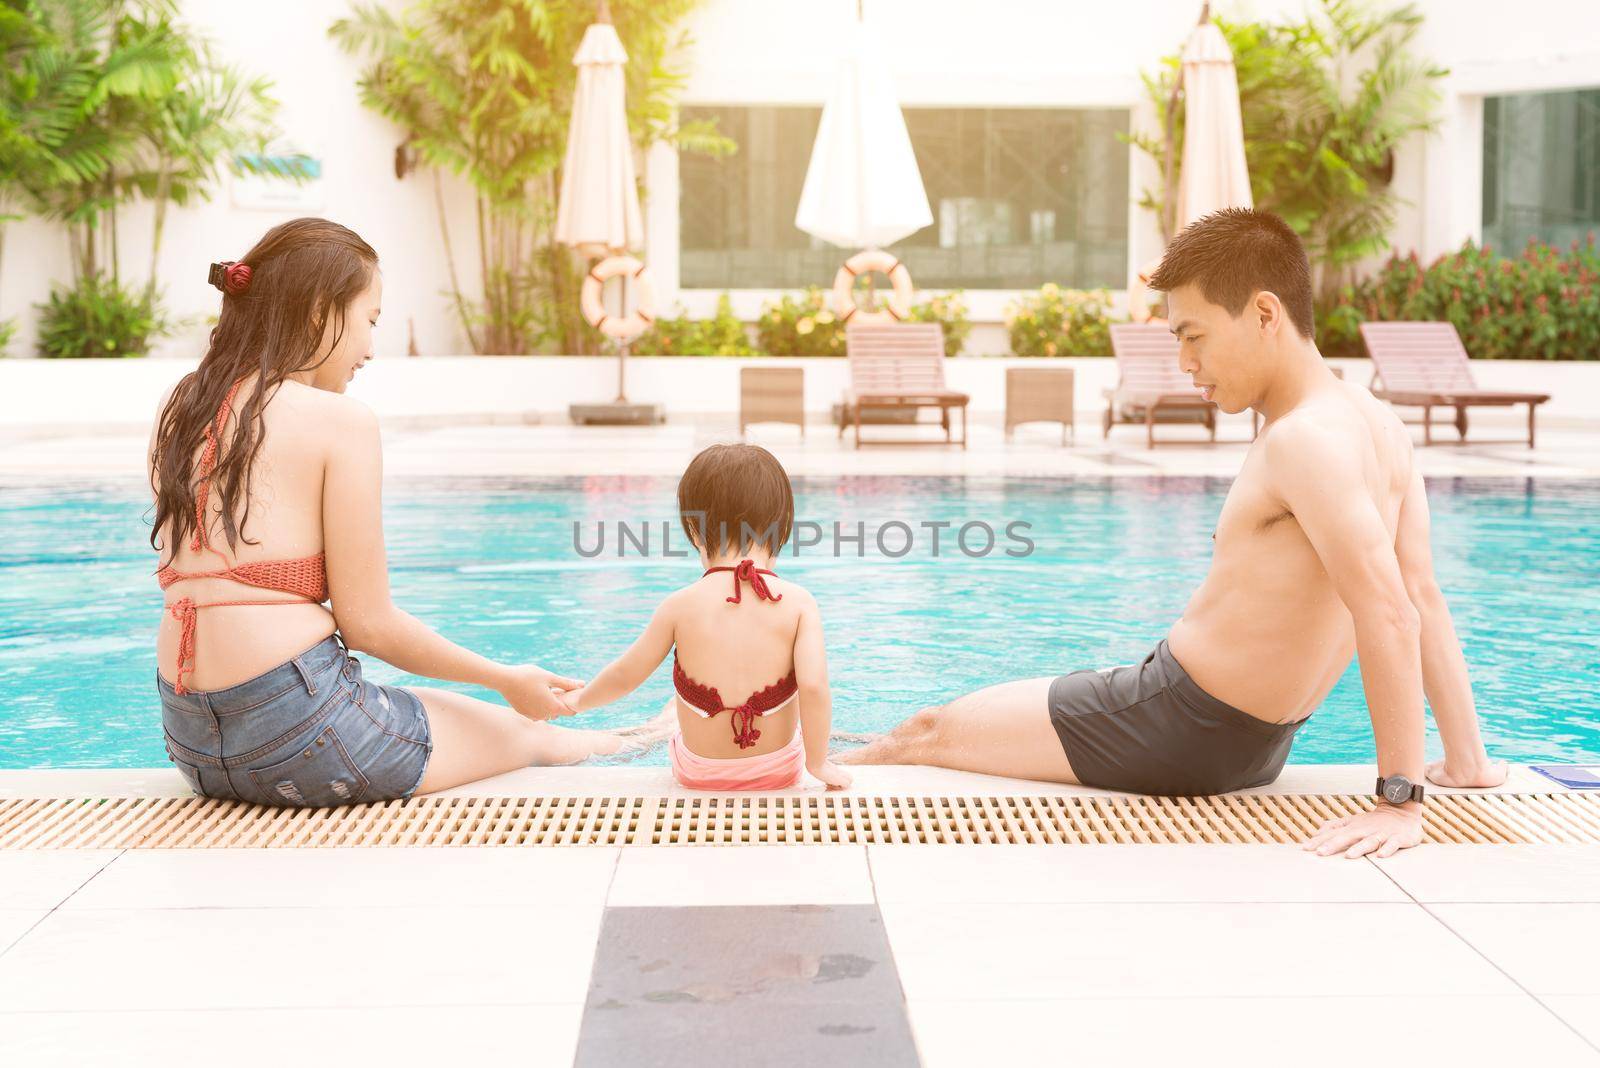 Happy family in swimming pool. Summer holidays and vacation concept